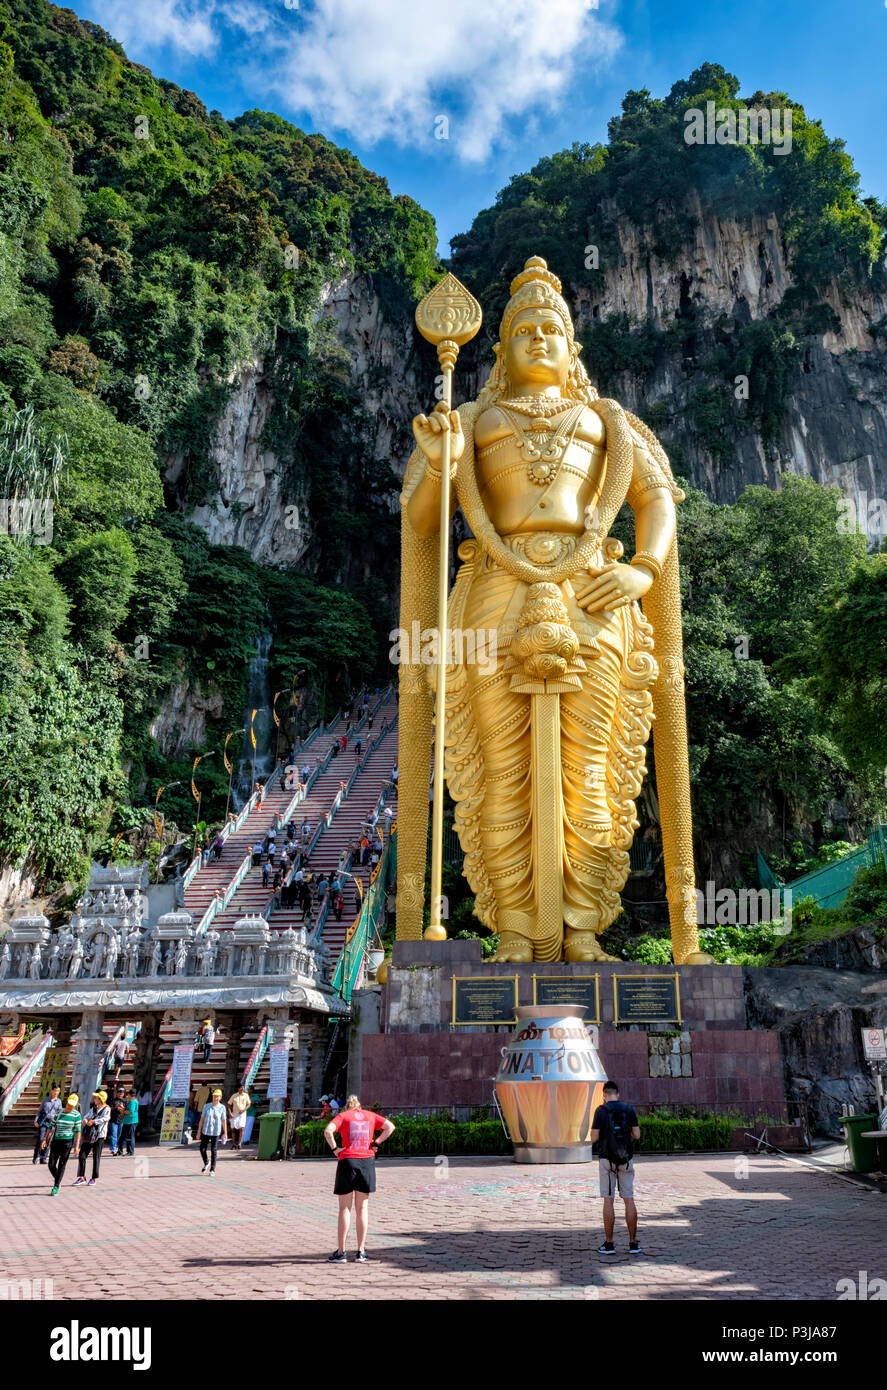 The Golden Statue outside the Hindu Temple in the Batu Caves at Selangor, on Borneo, Malaysia Stock Photo